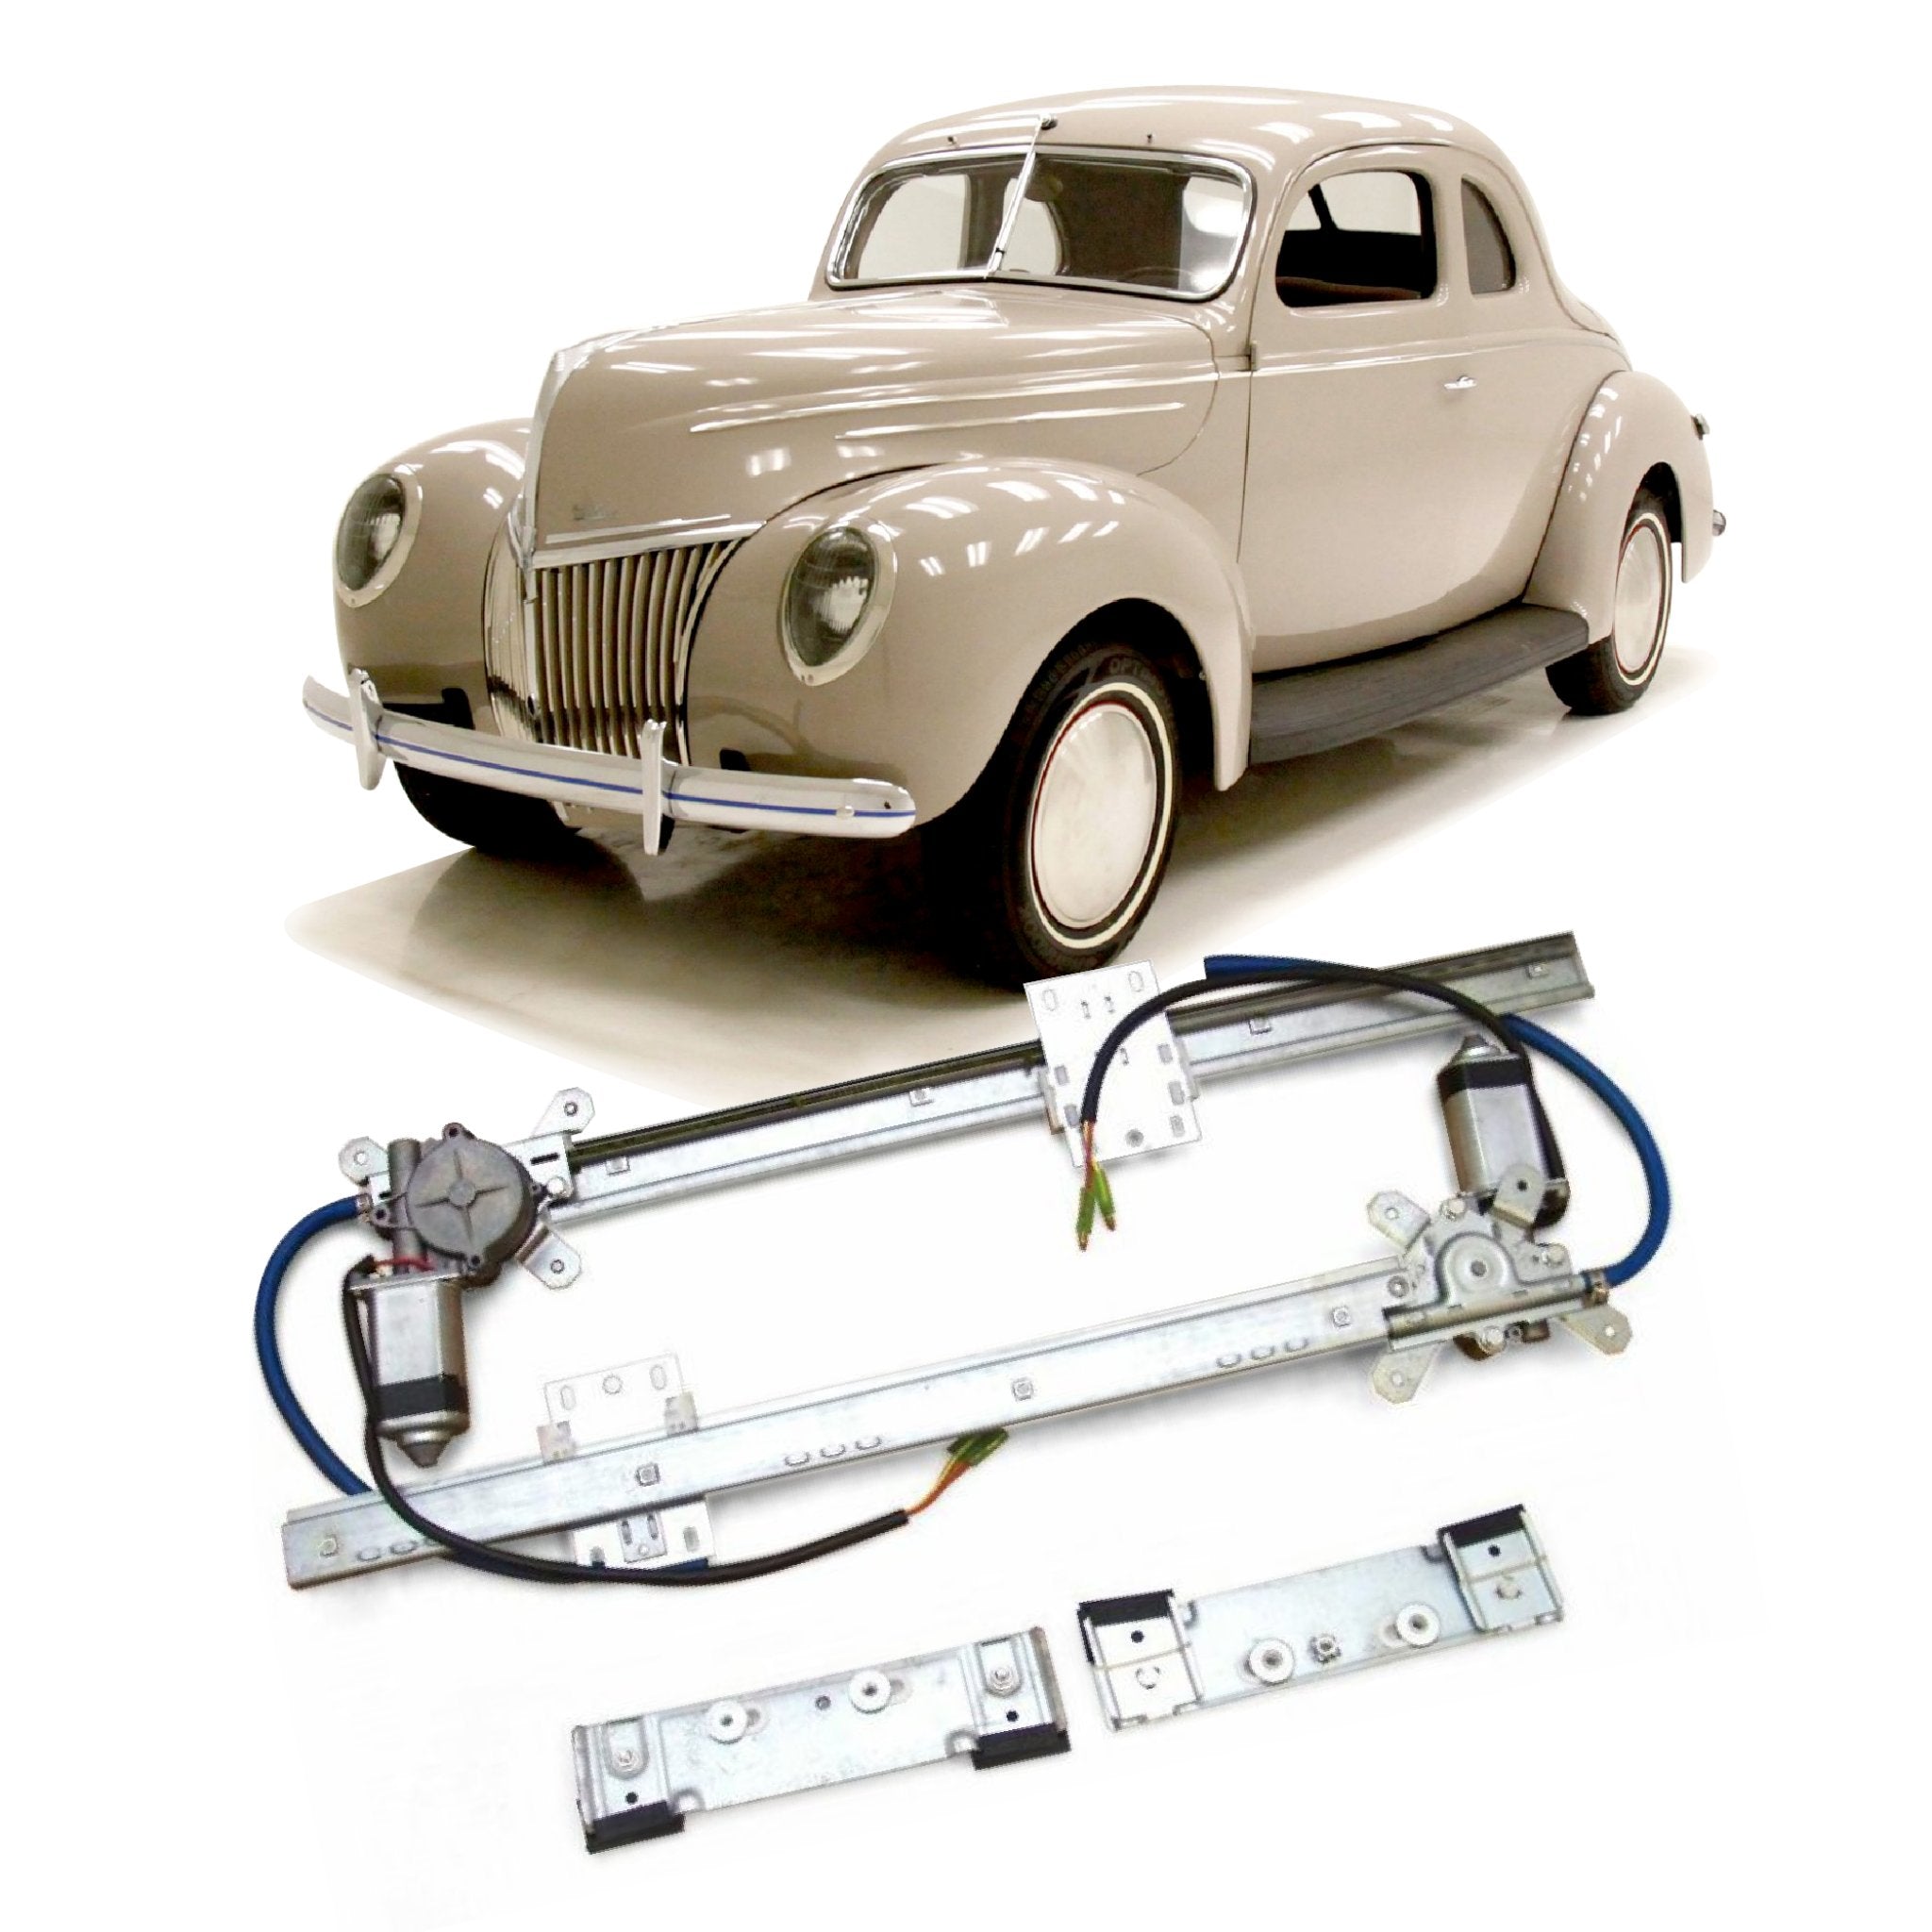 2 Door 12V Power Window Conversion Kit for 1939 Ford Coupe Club Standard Deluxe